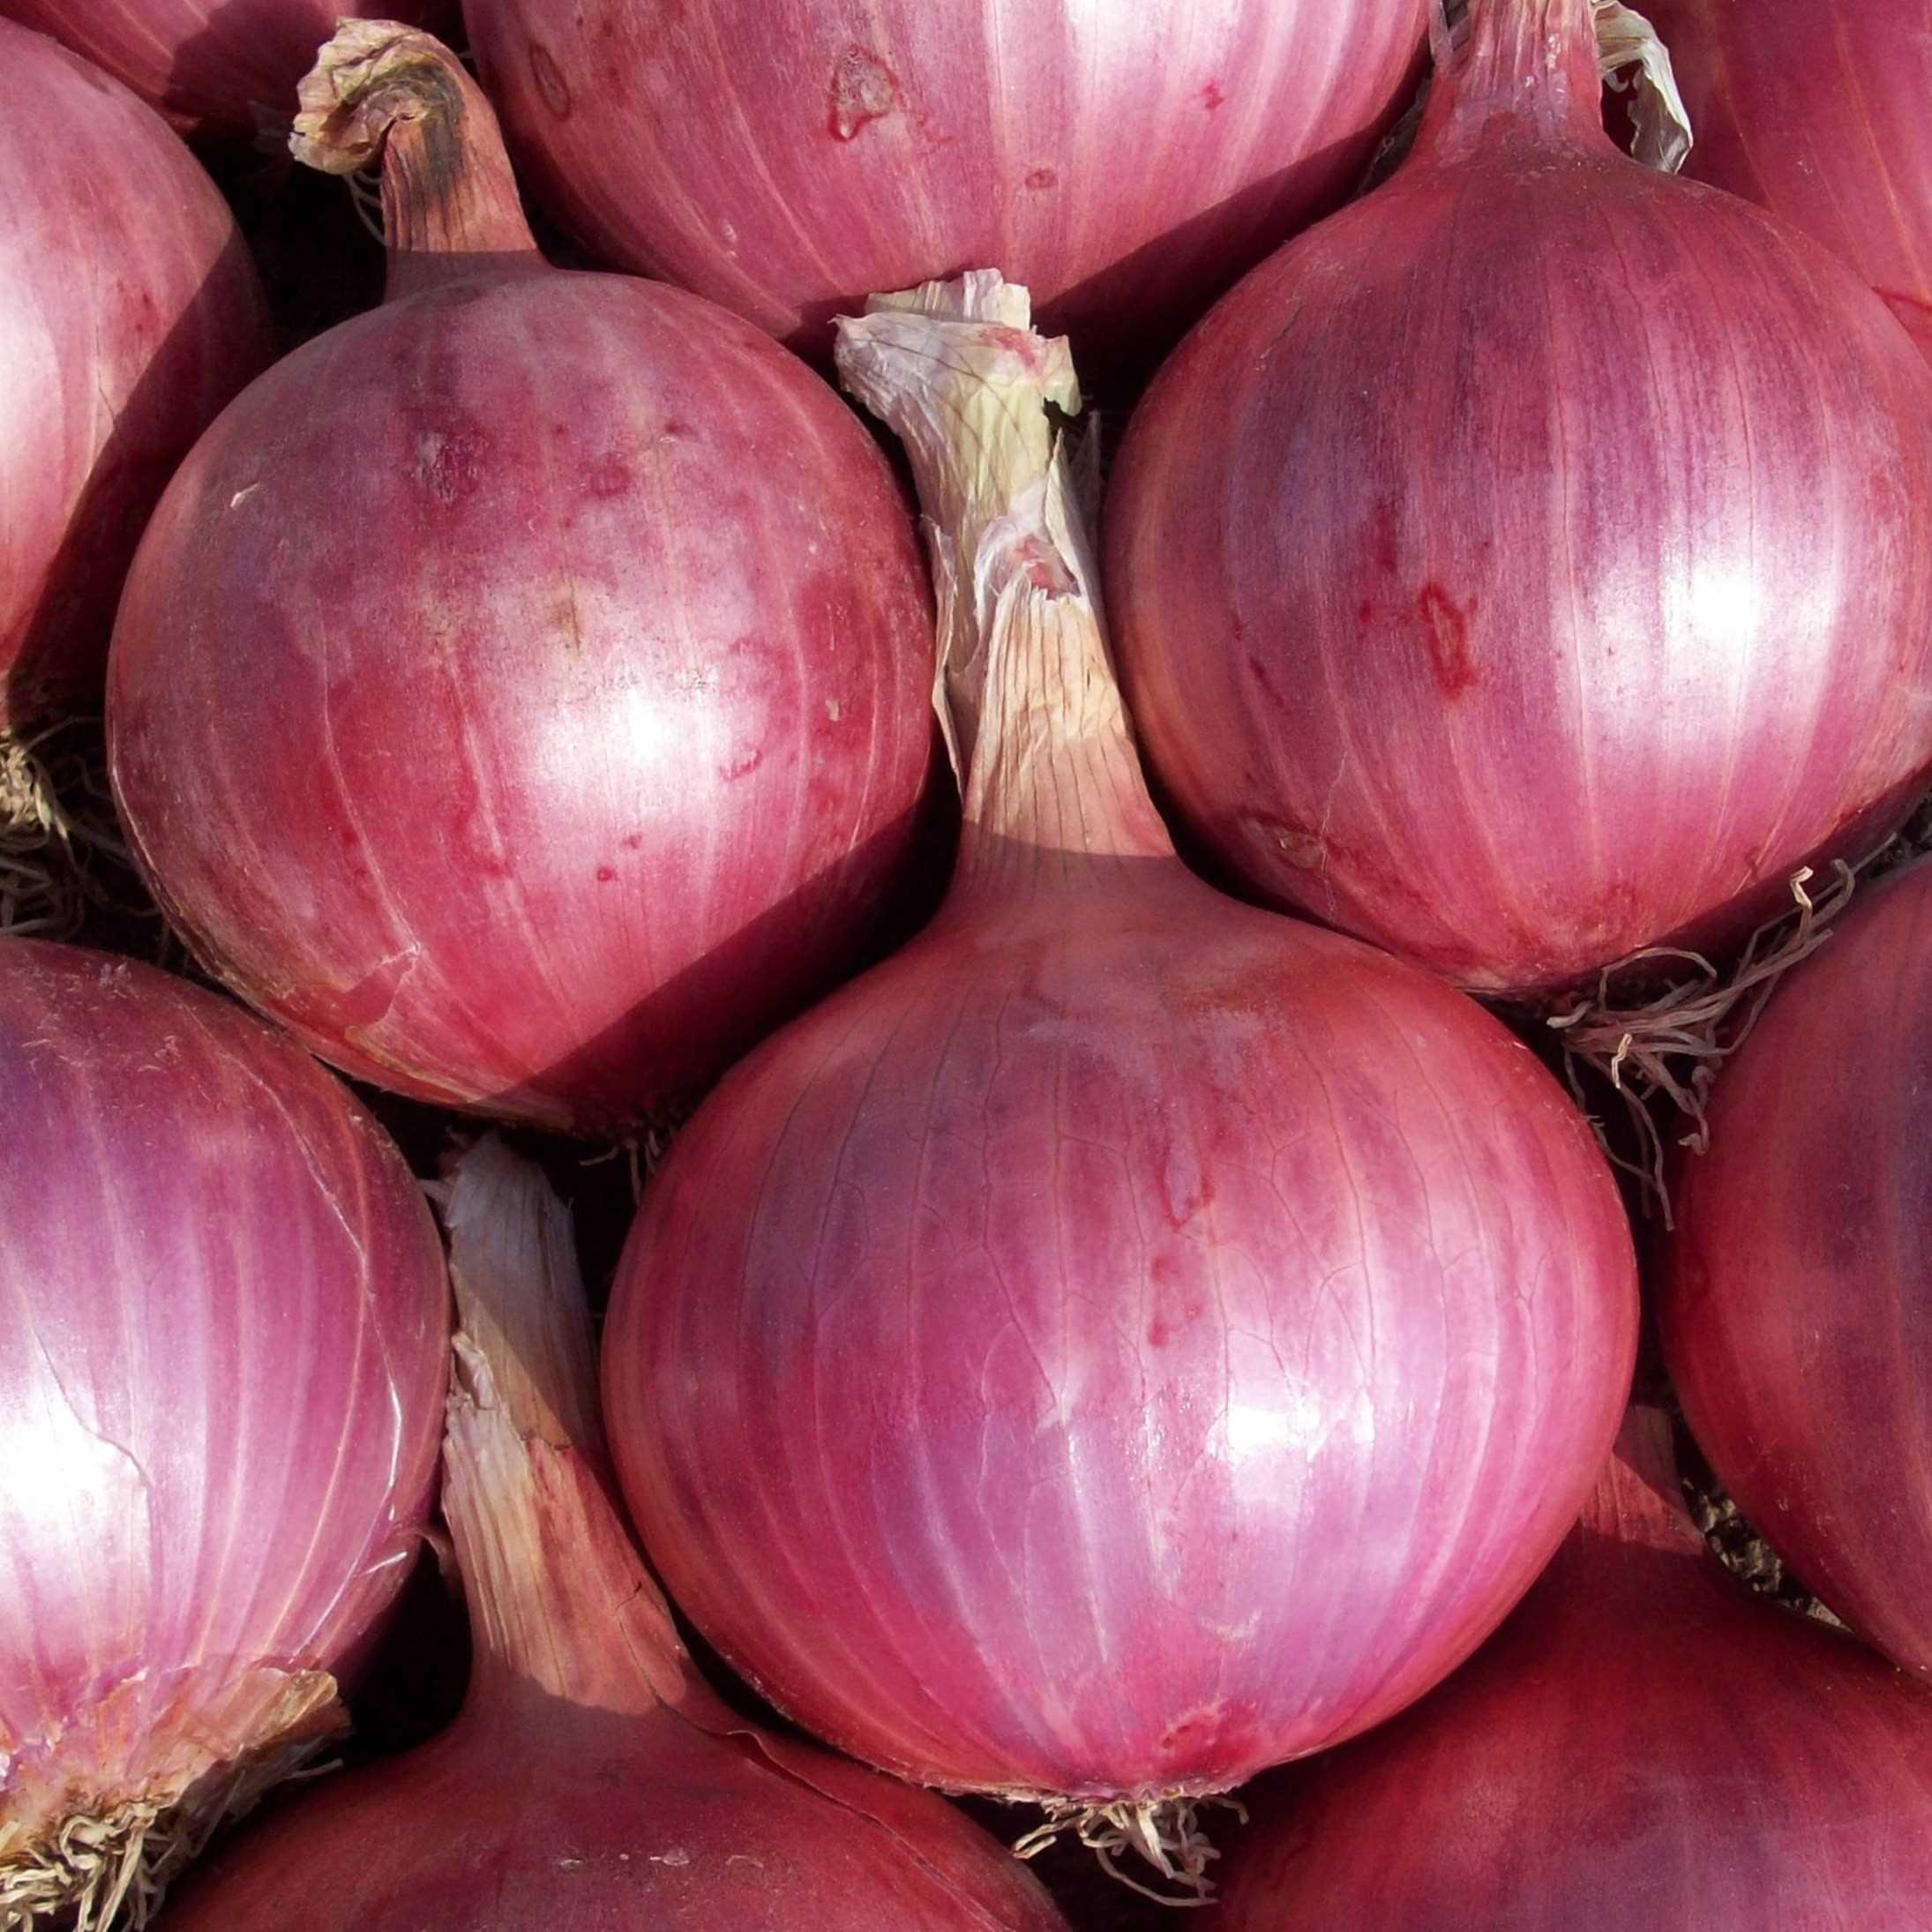 i want to buy Onion